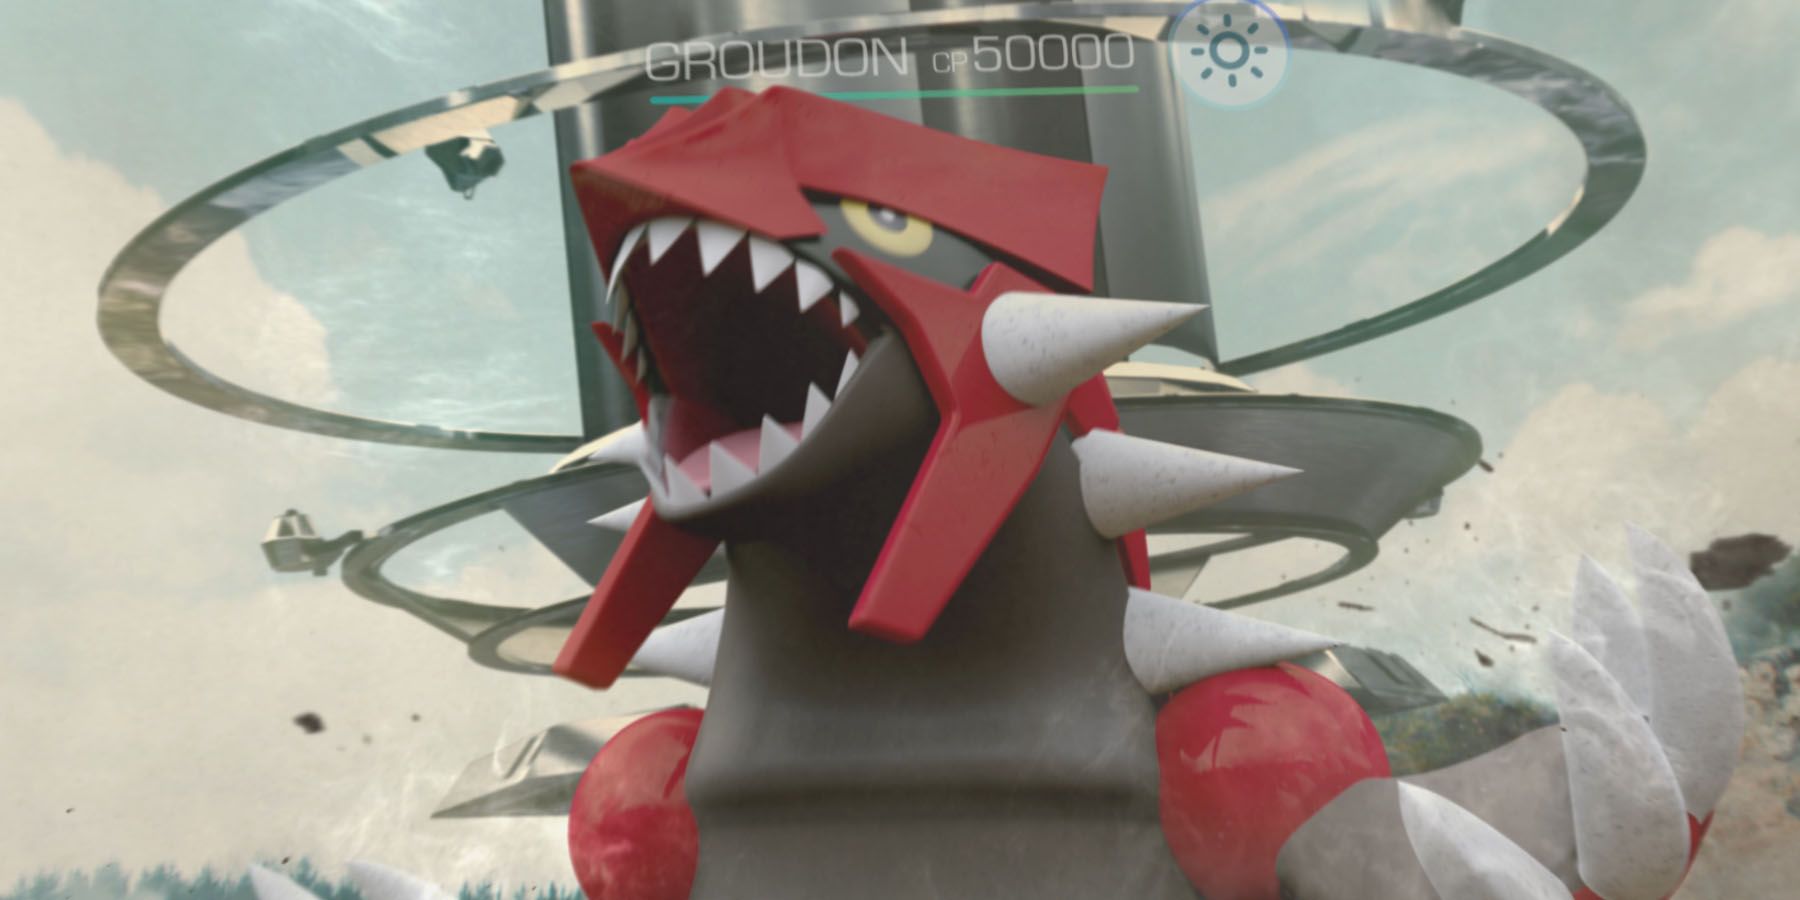 Groudon and Fire Punch